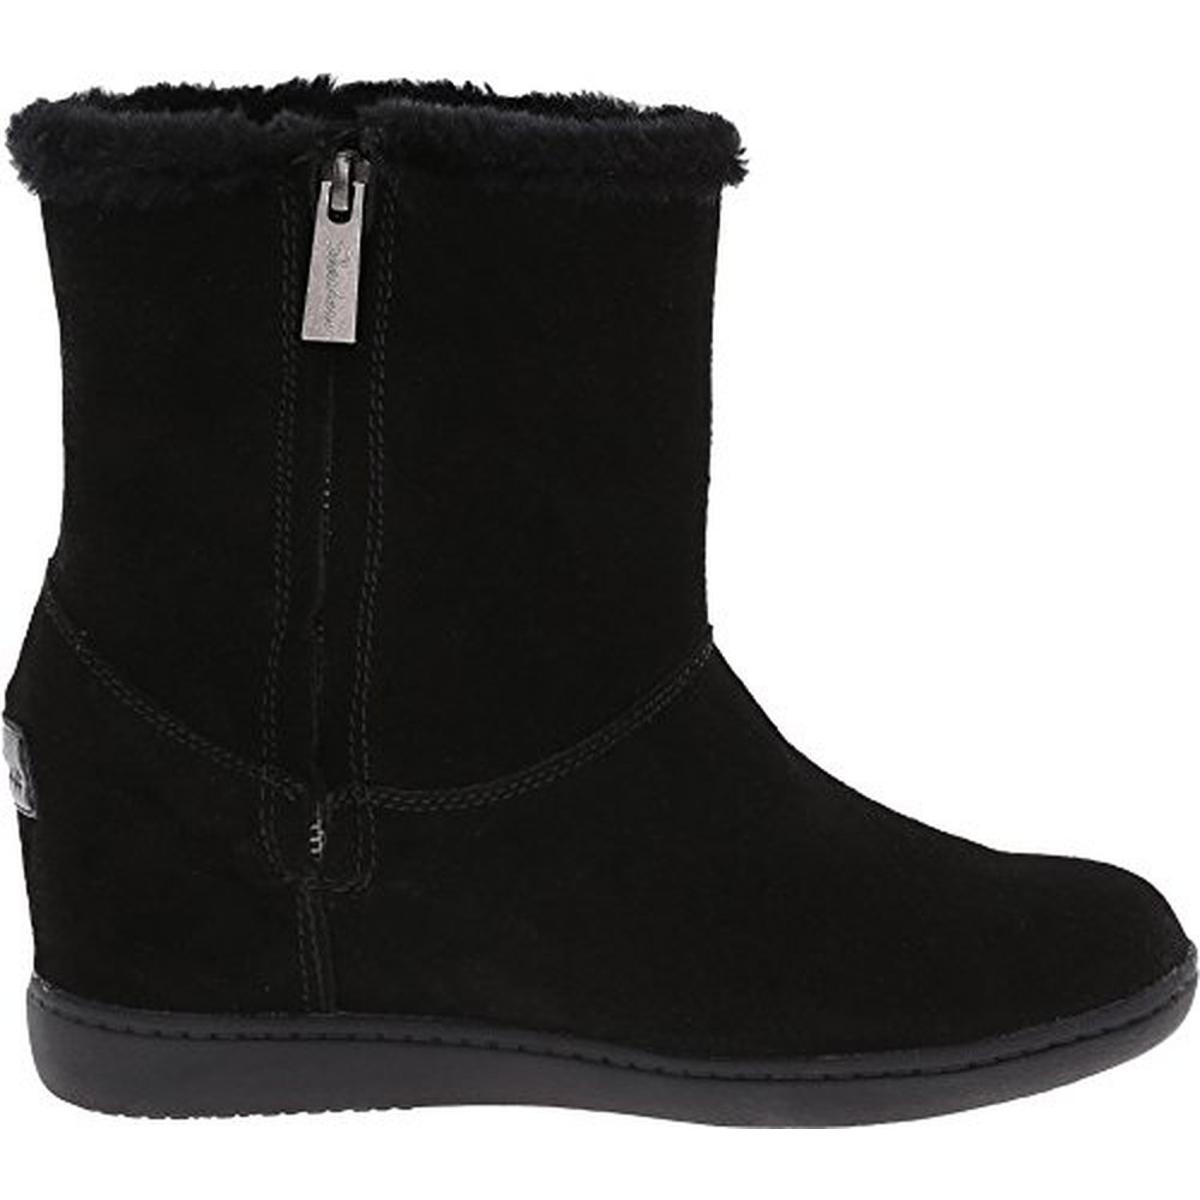 womens wedge boots with fur trim